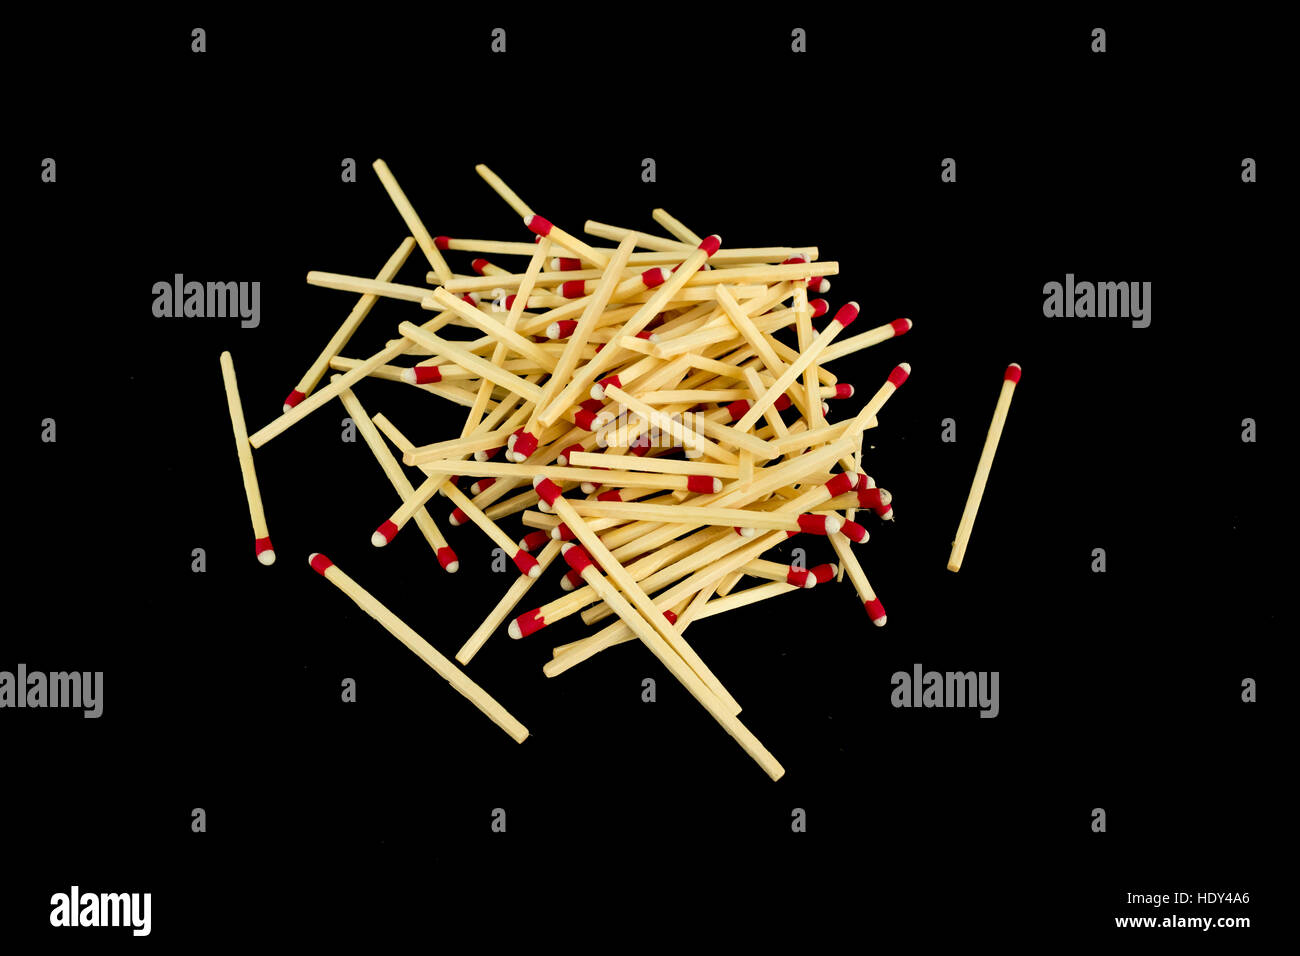 A pile of strike-anywhere matches isolated on a black background, photographed from the side Stock Photo